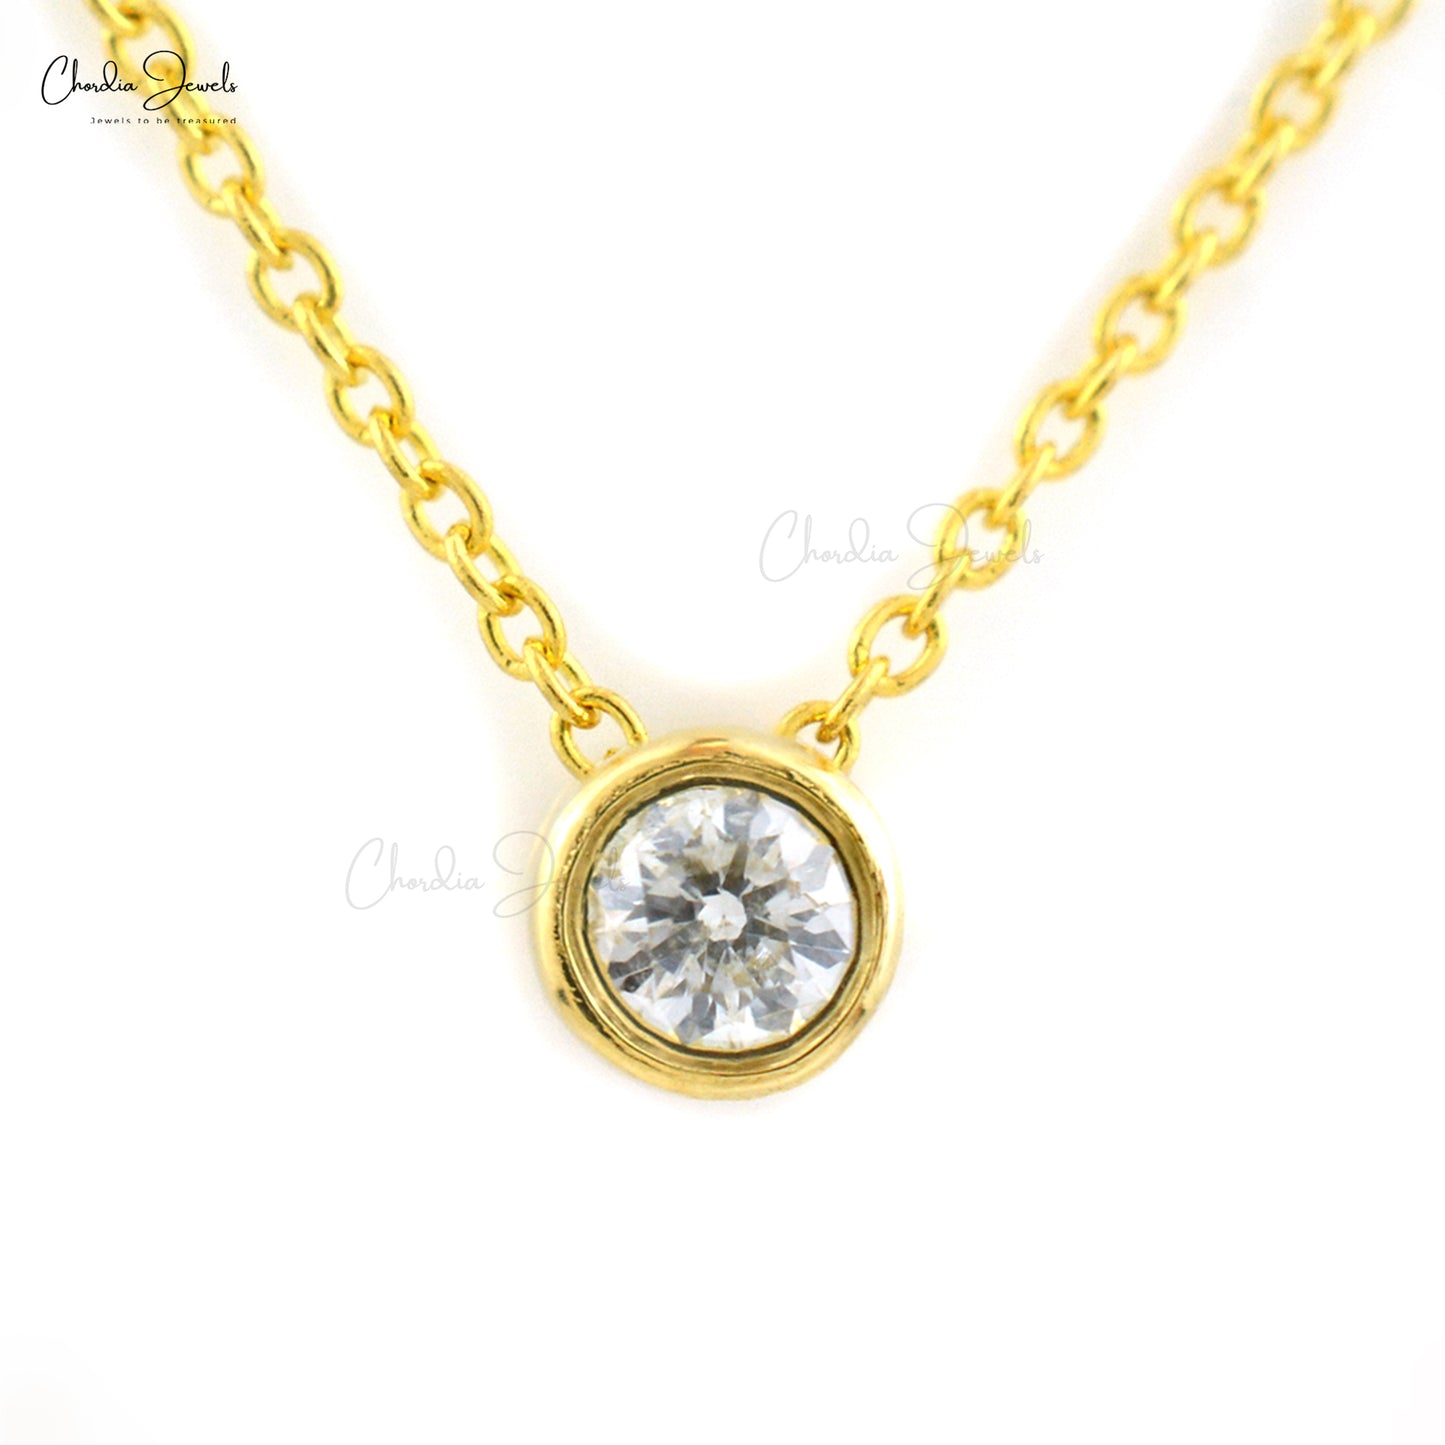 Certified Solitaire Diamond Necklace 0.1 ct. Yellow Gold